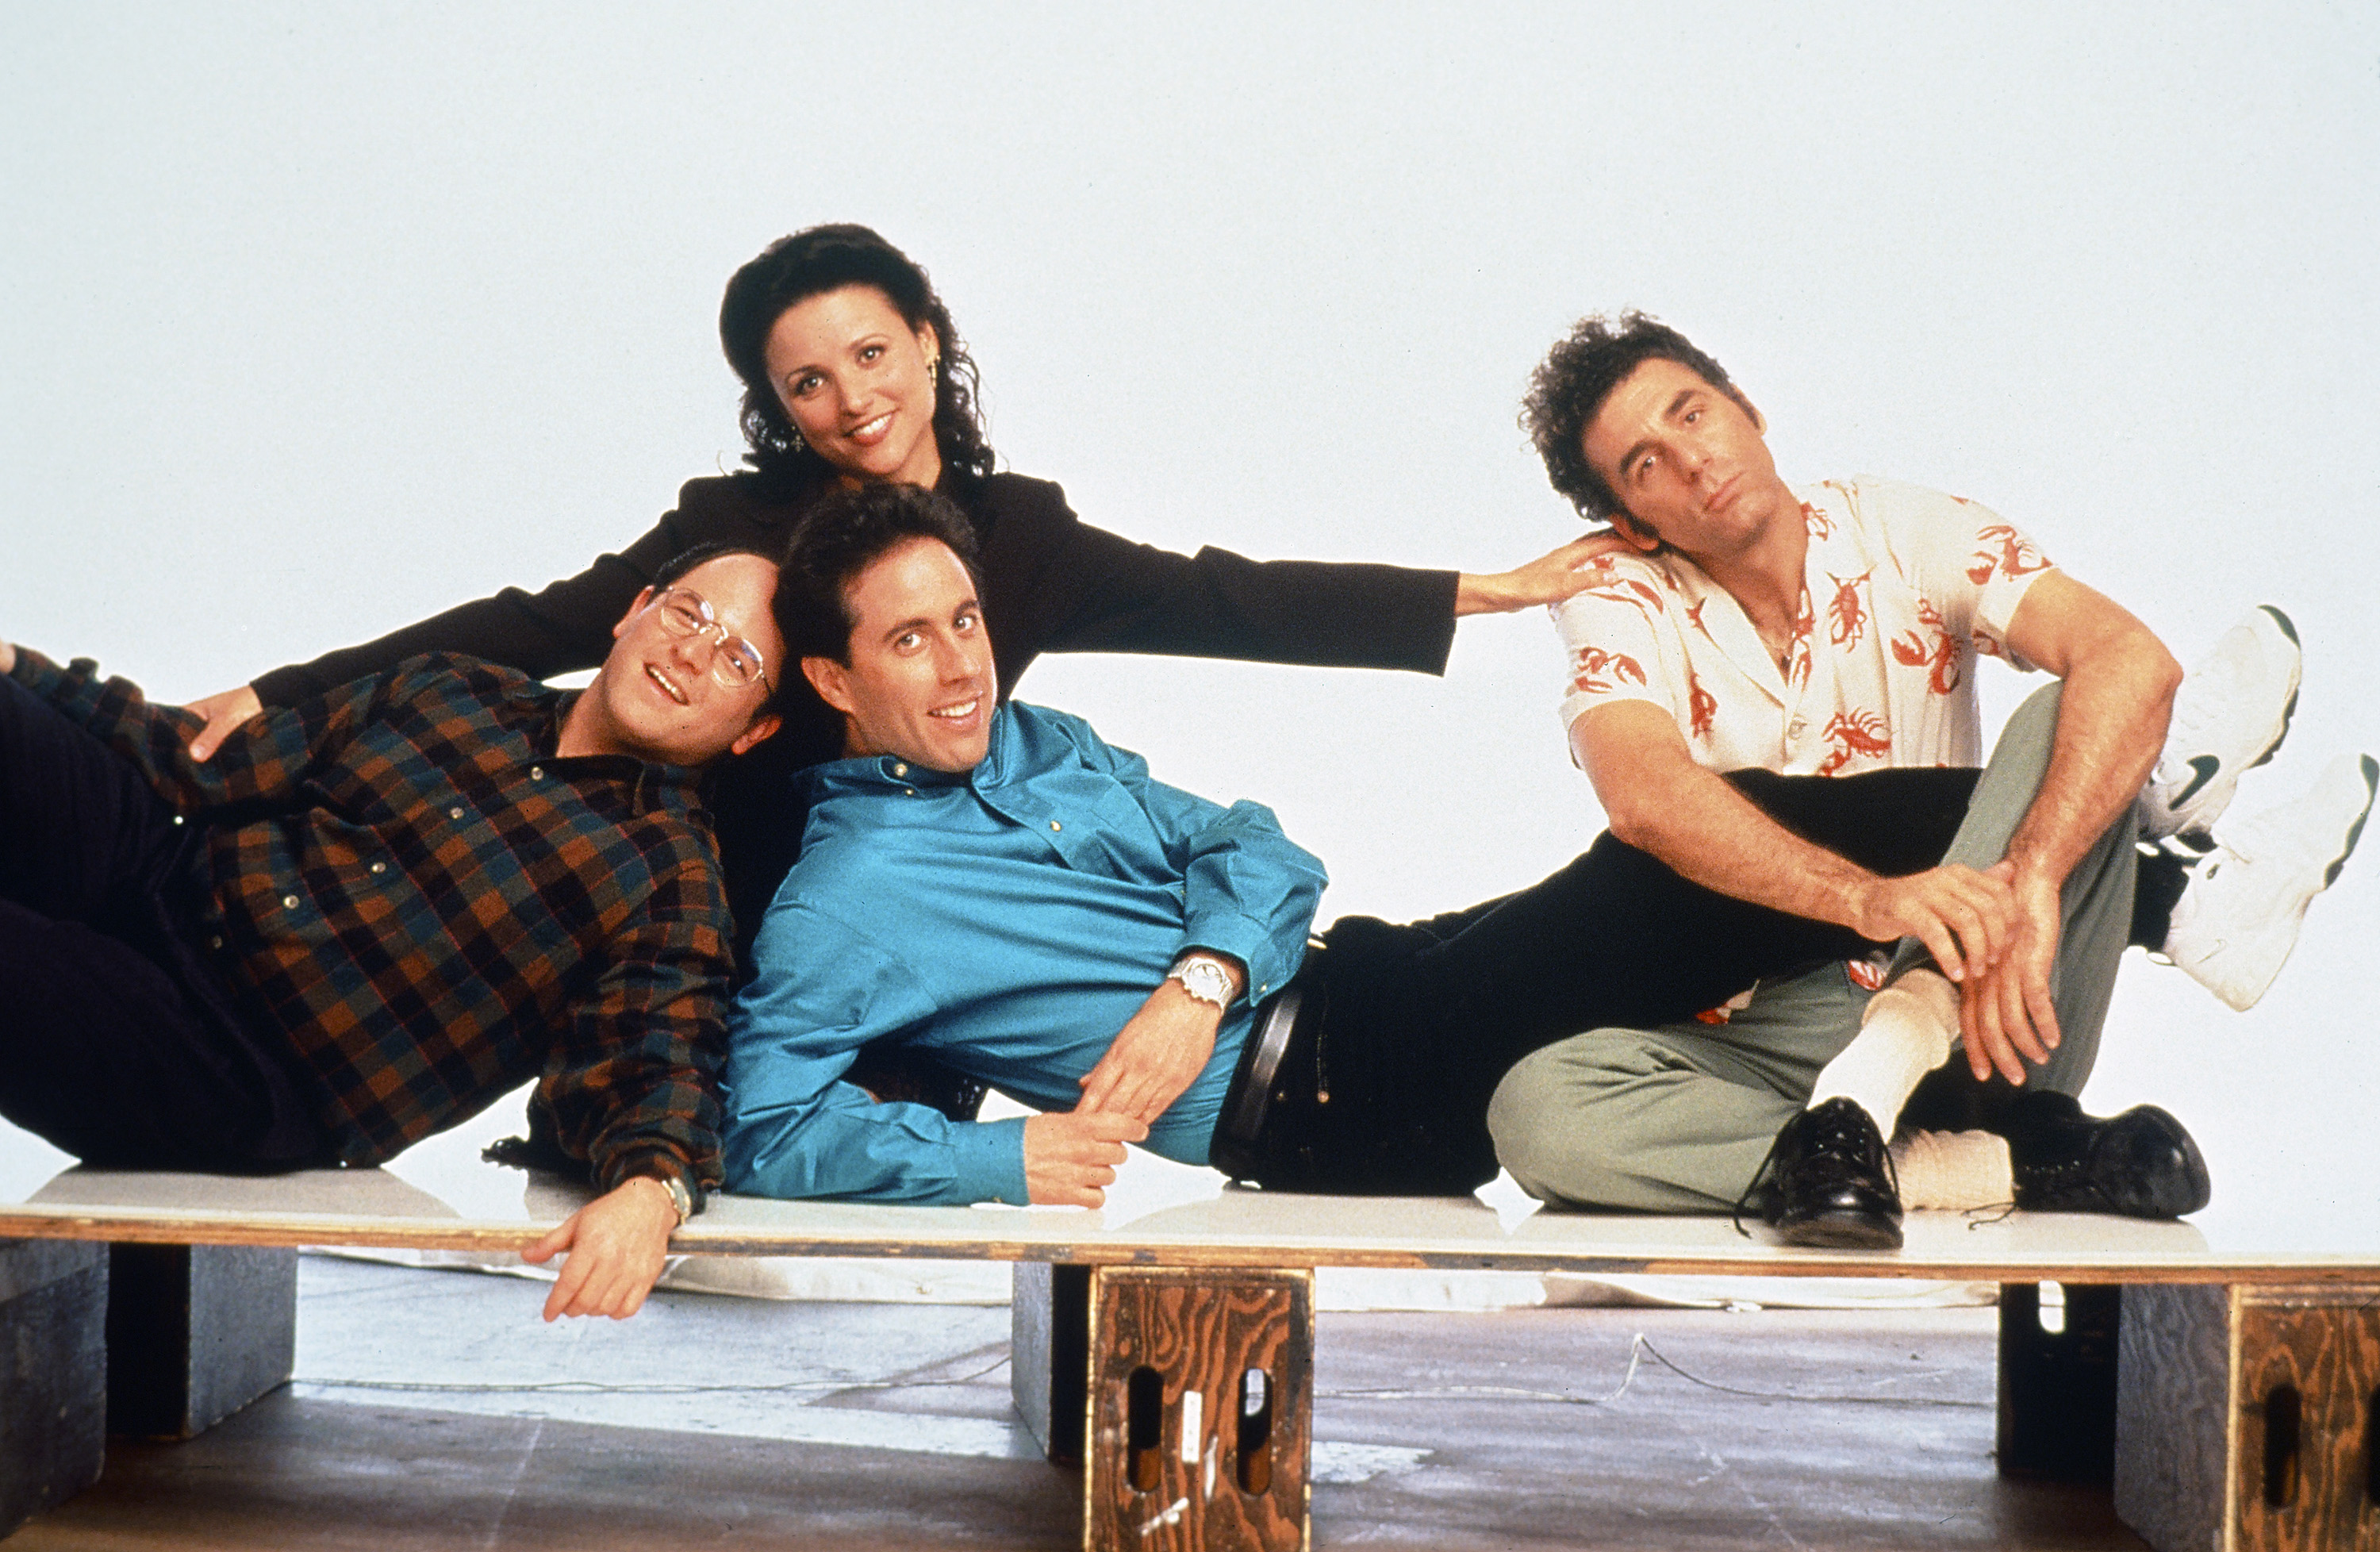 The cast of 'Seinfeld' pose for promotional photos ahead of the season 6 premiere. Season 6 contains one of the best 'Seinfeld' Christmas epsiodes produced.